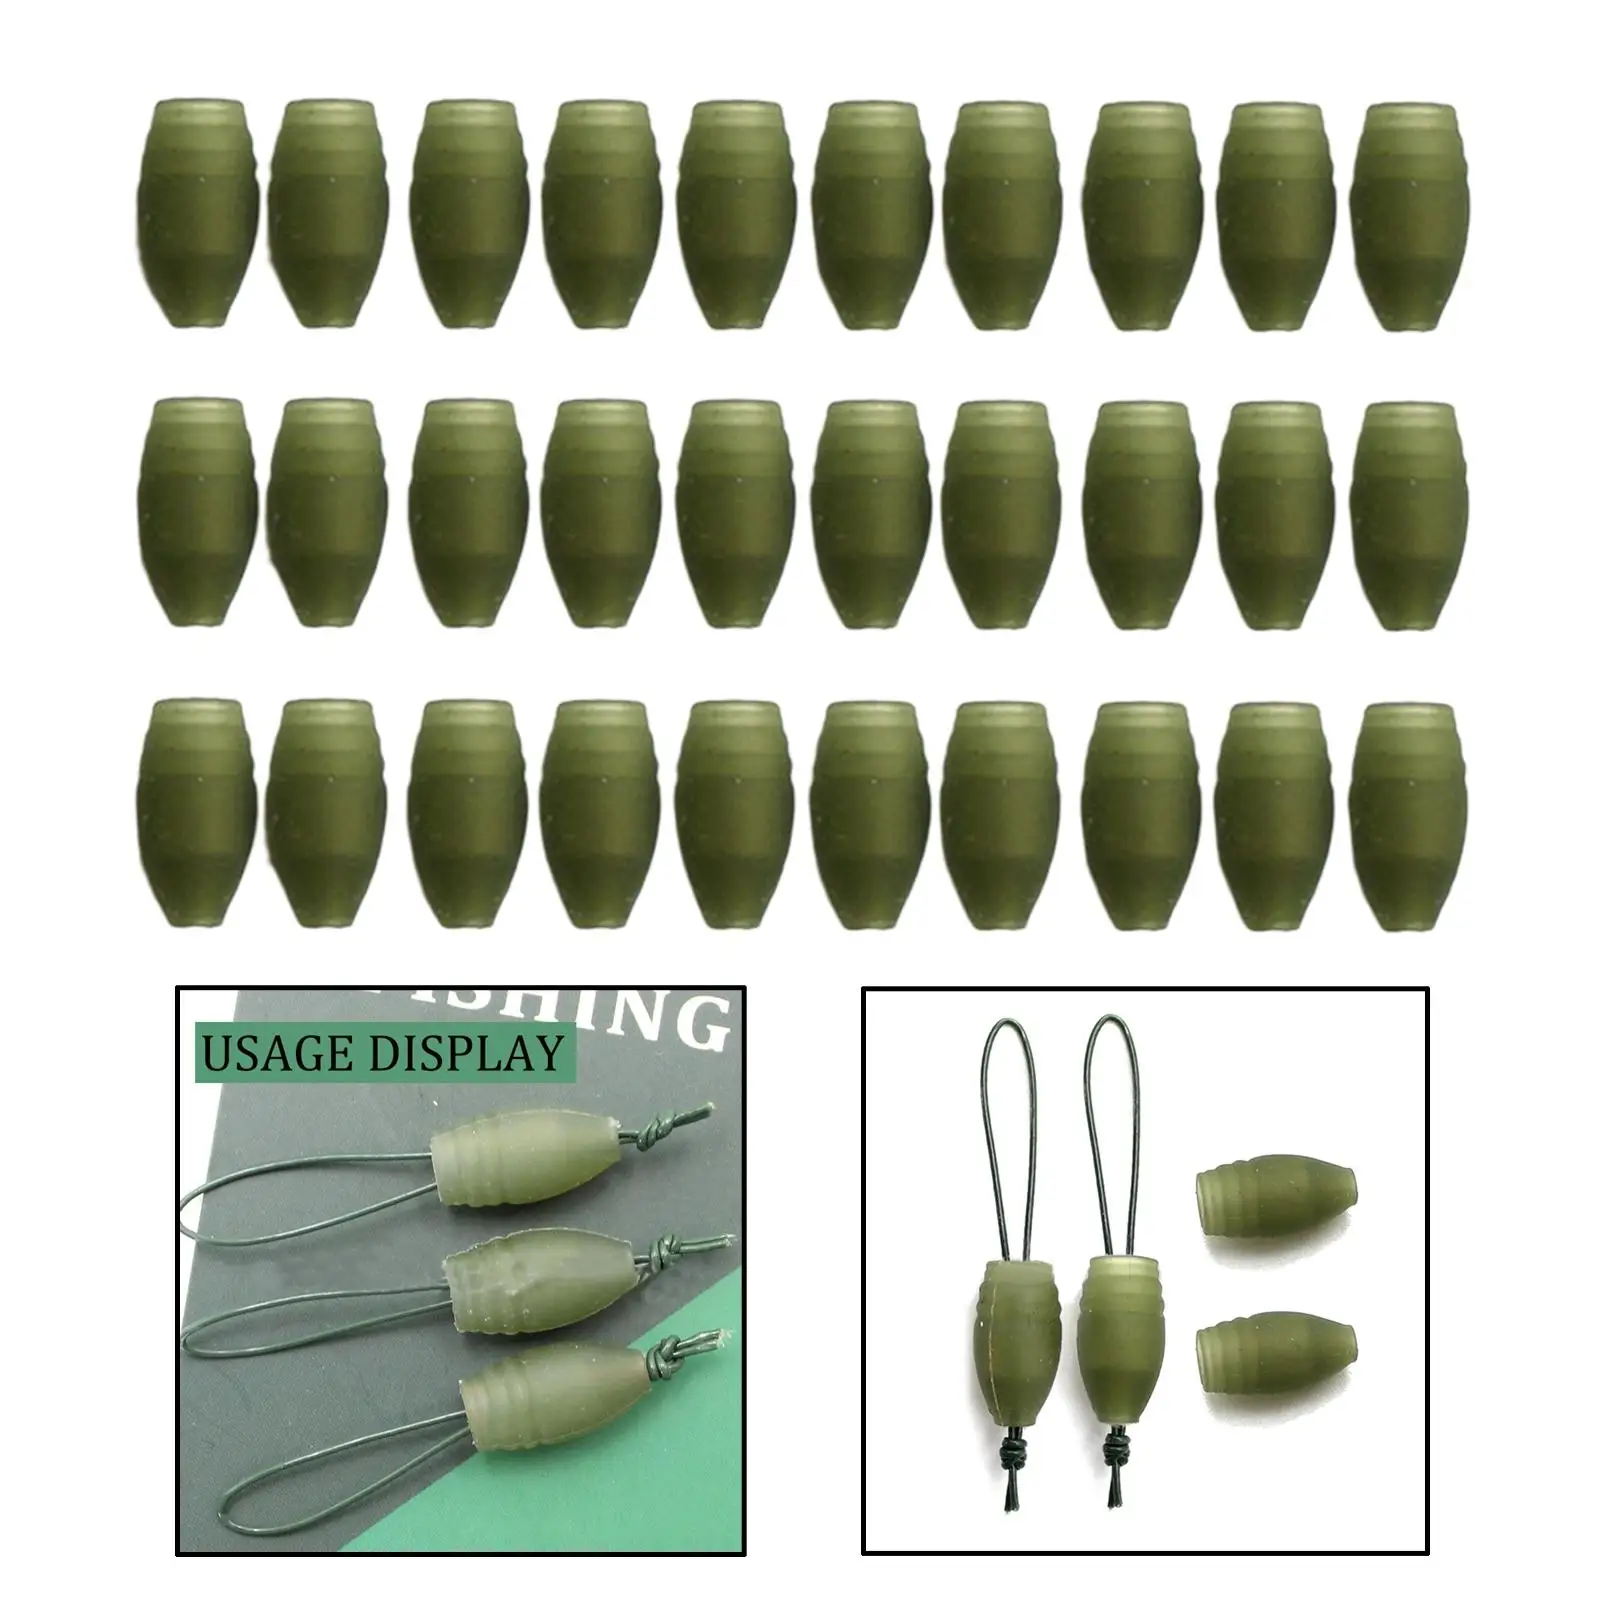 30 Pieces Dacron Connectors Carp Fishing Tool Accessories Hollow Fishing Tackle Rigs Coarse Stop Bead